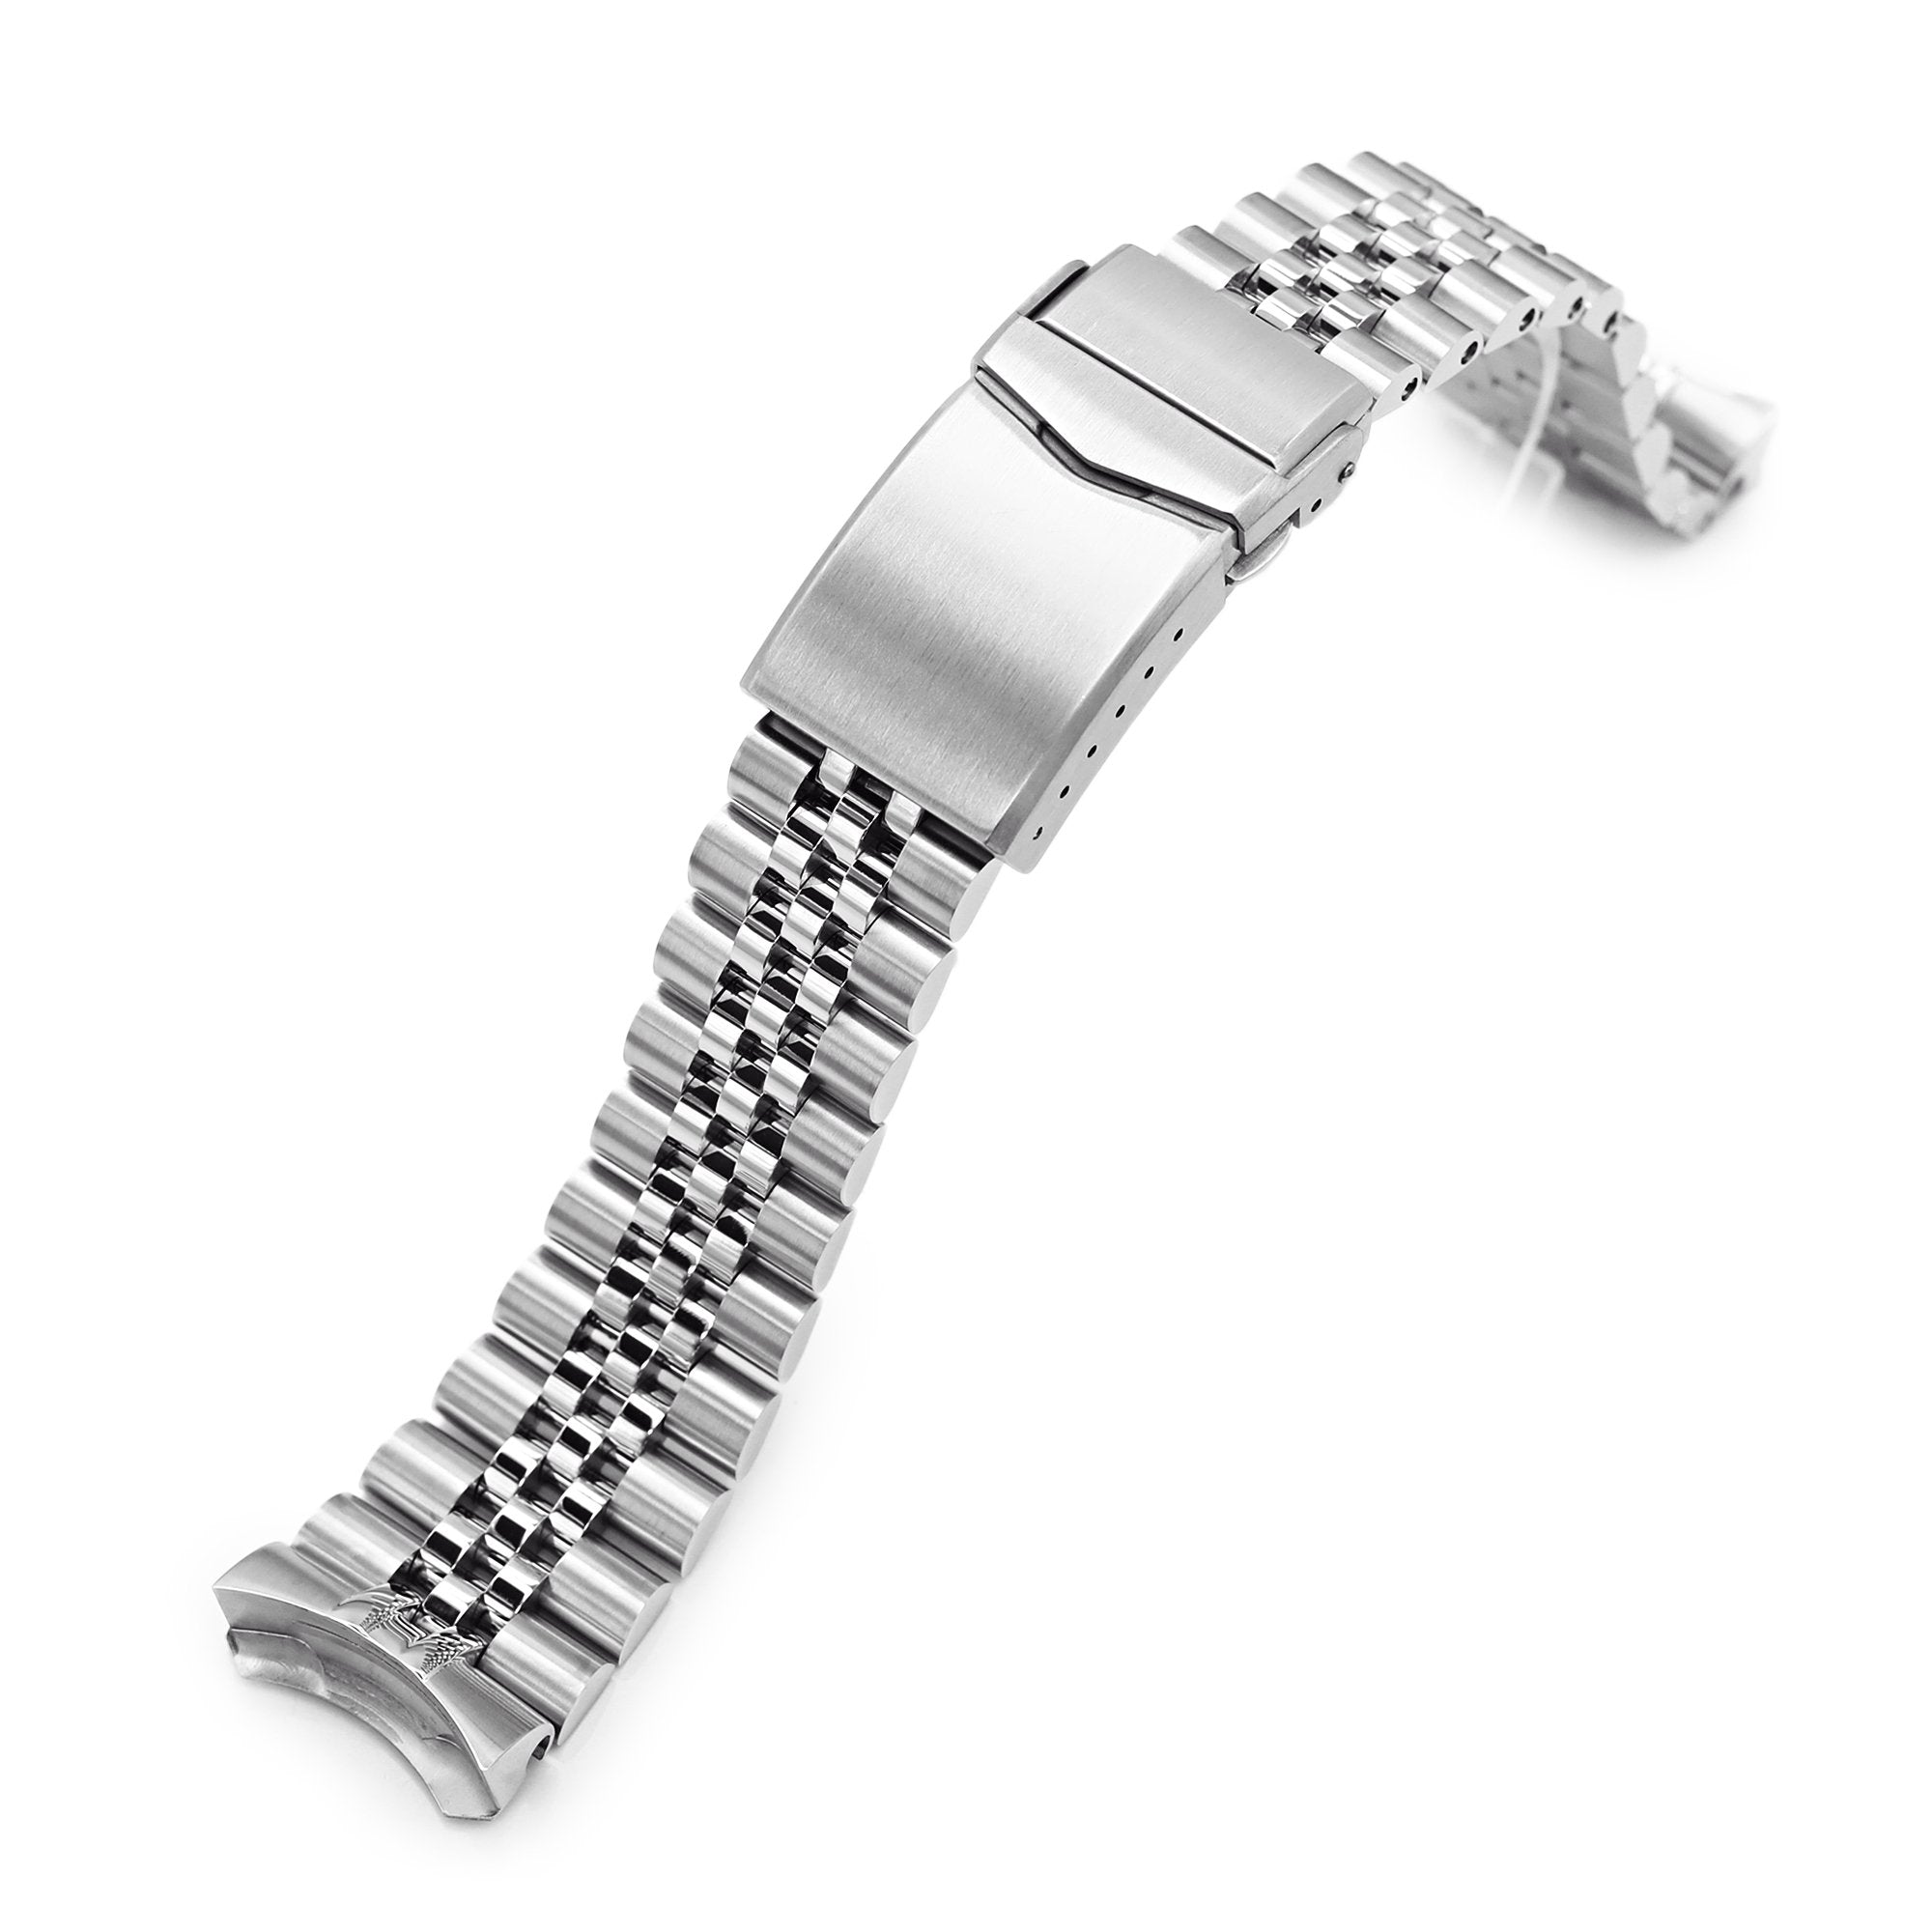 22mm Super-J Louis Watch Band for Seiko GMT SSK001, 316L Stainless Steel Brushed V-Clasp Strapcode Watch Bands